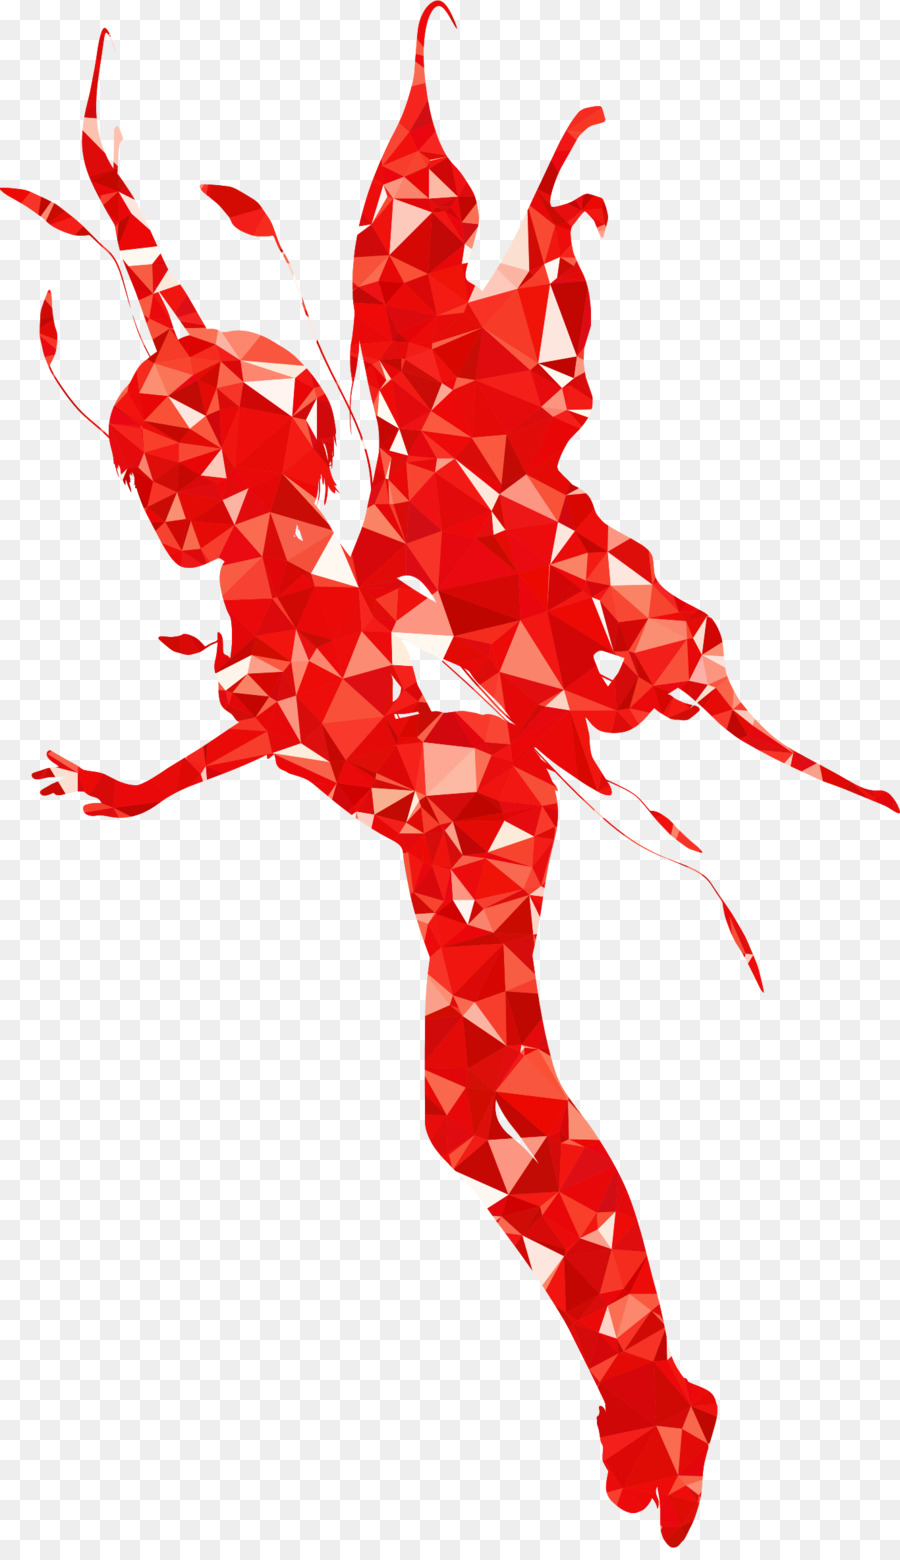 Fairy Silhouette Clip art - ruby png download - 1366*2350 - Free Transparent Fairy png Download.